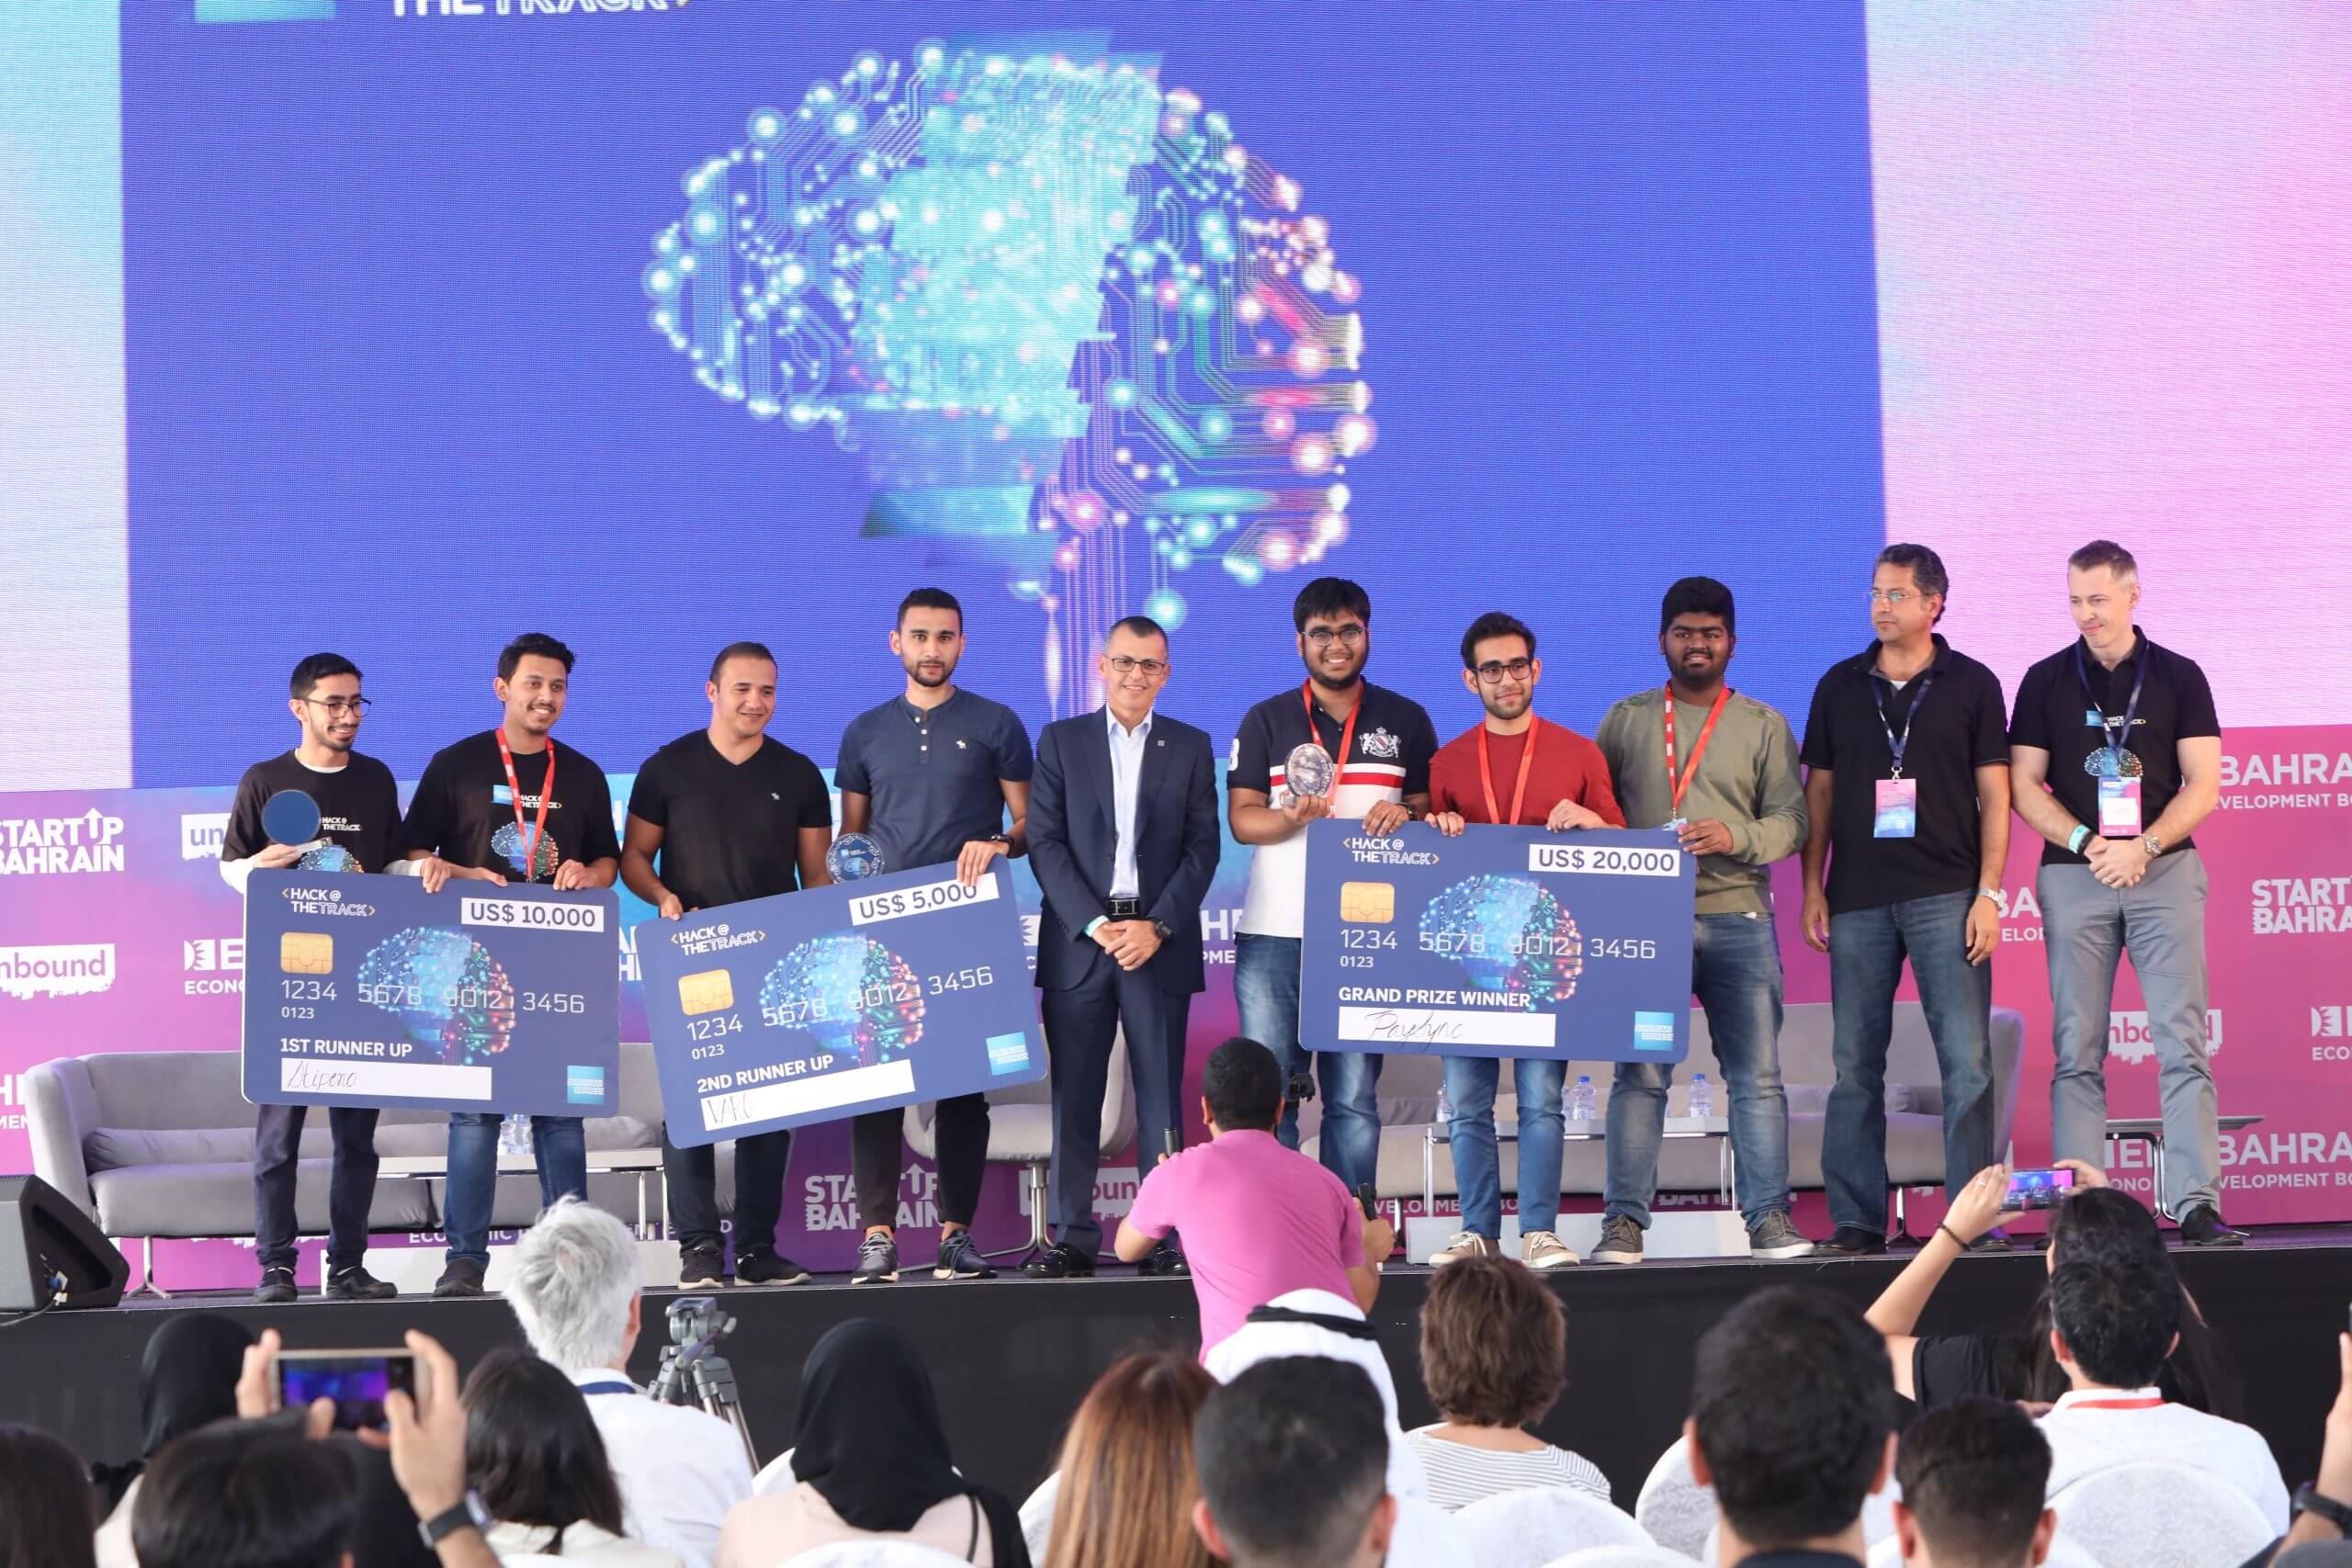 Startup Bahrain Week Supports the Future of Innovation in the Region